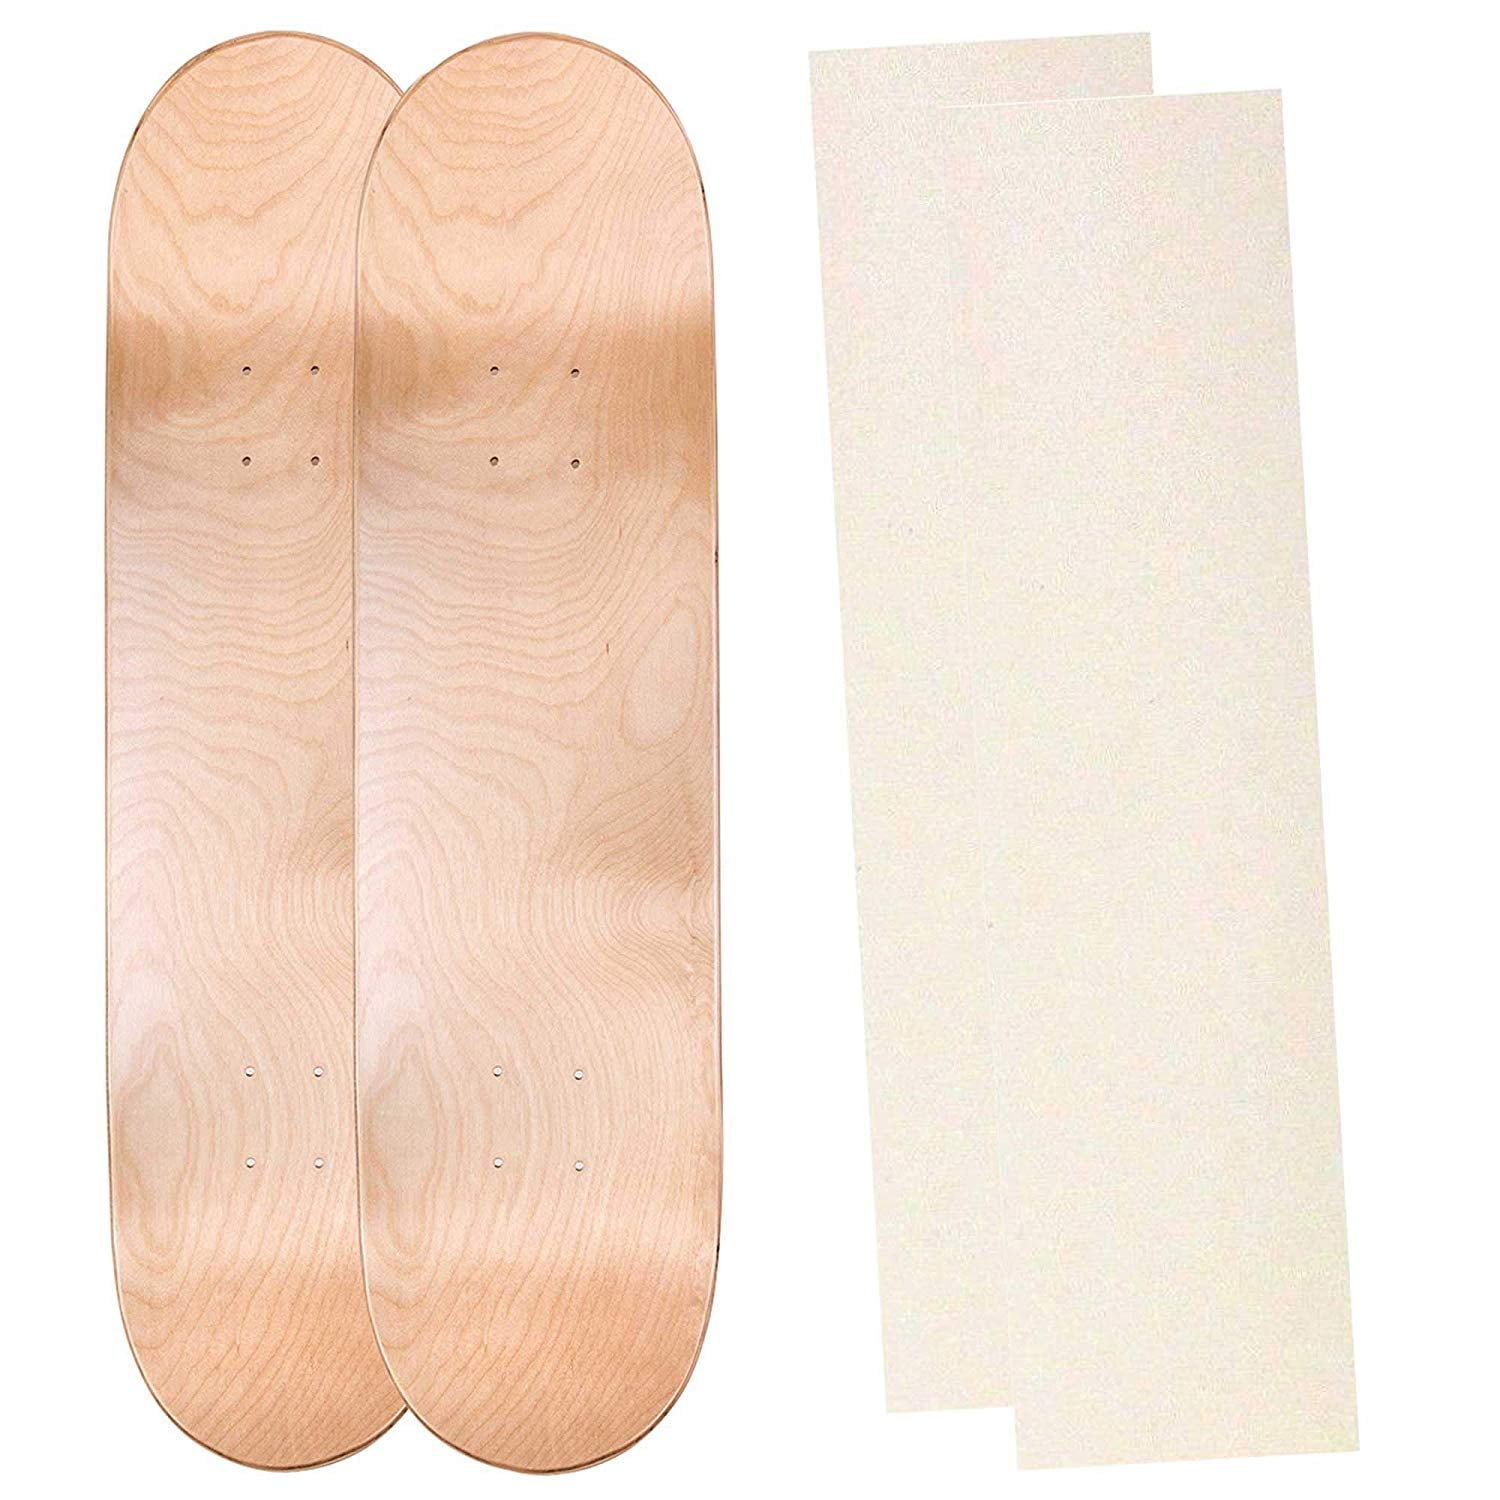 Cal 7 Blank Maple Skateboard Deck 8.5" with Mob Grip Tape Multi-Colors Set 